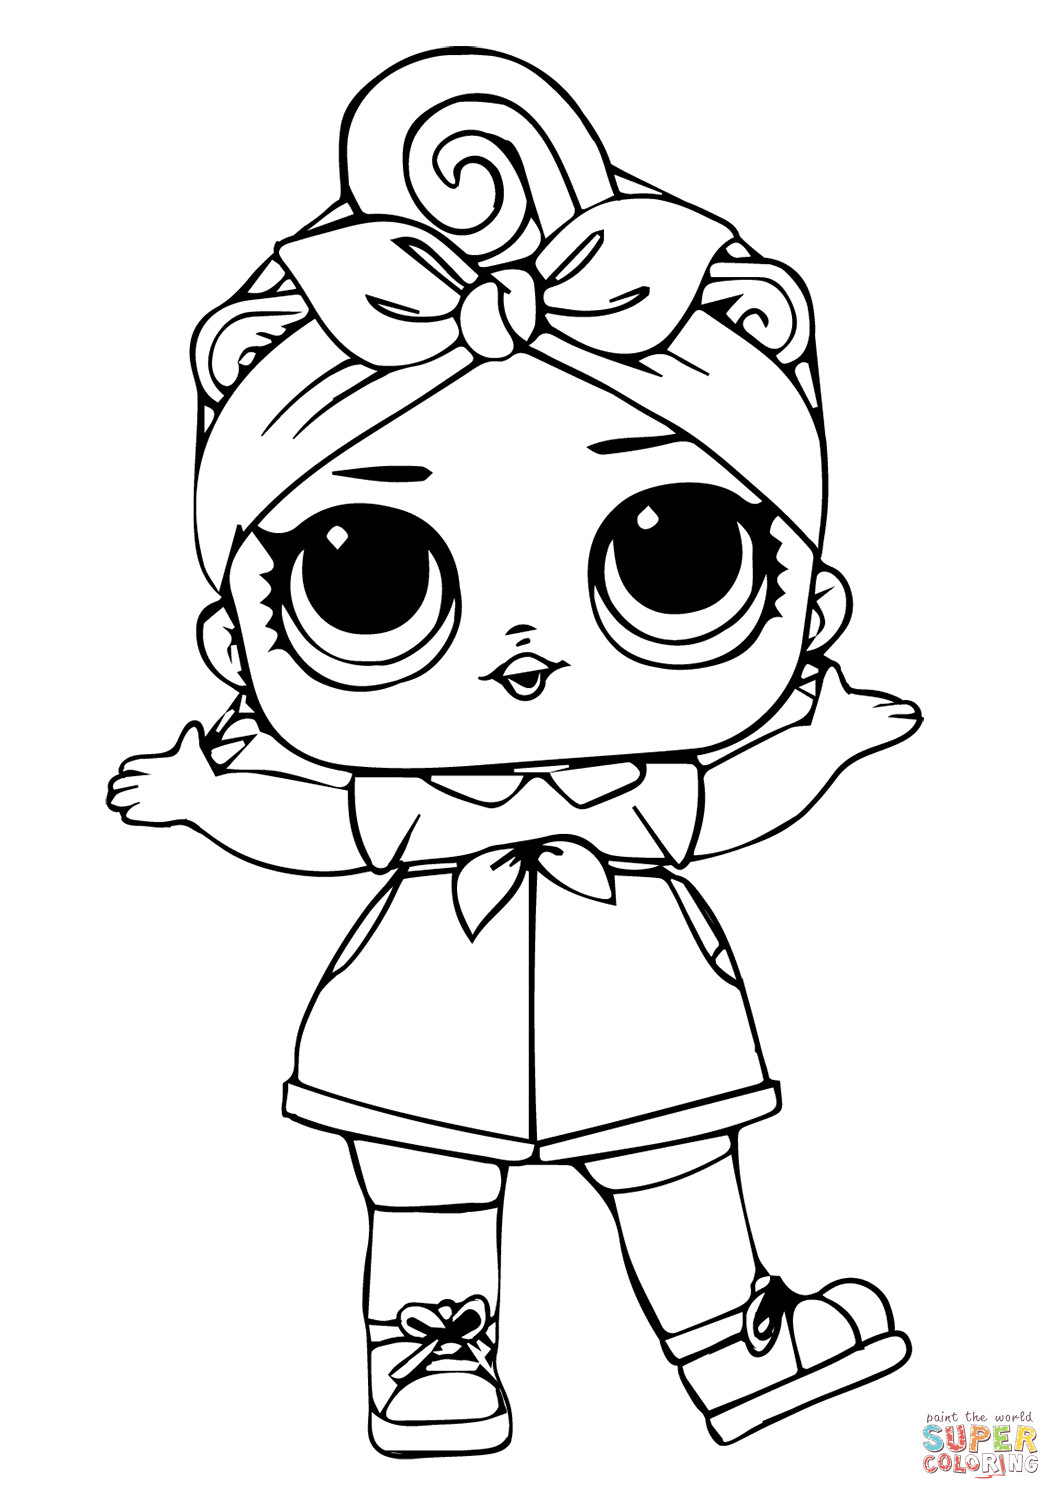 The Best Ideas for Baby Lol Coloring Pages – Home, Family, Style and ...